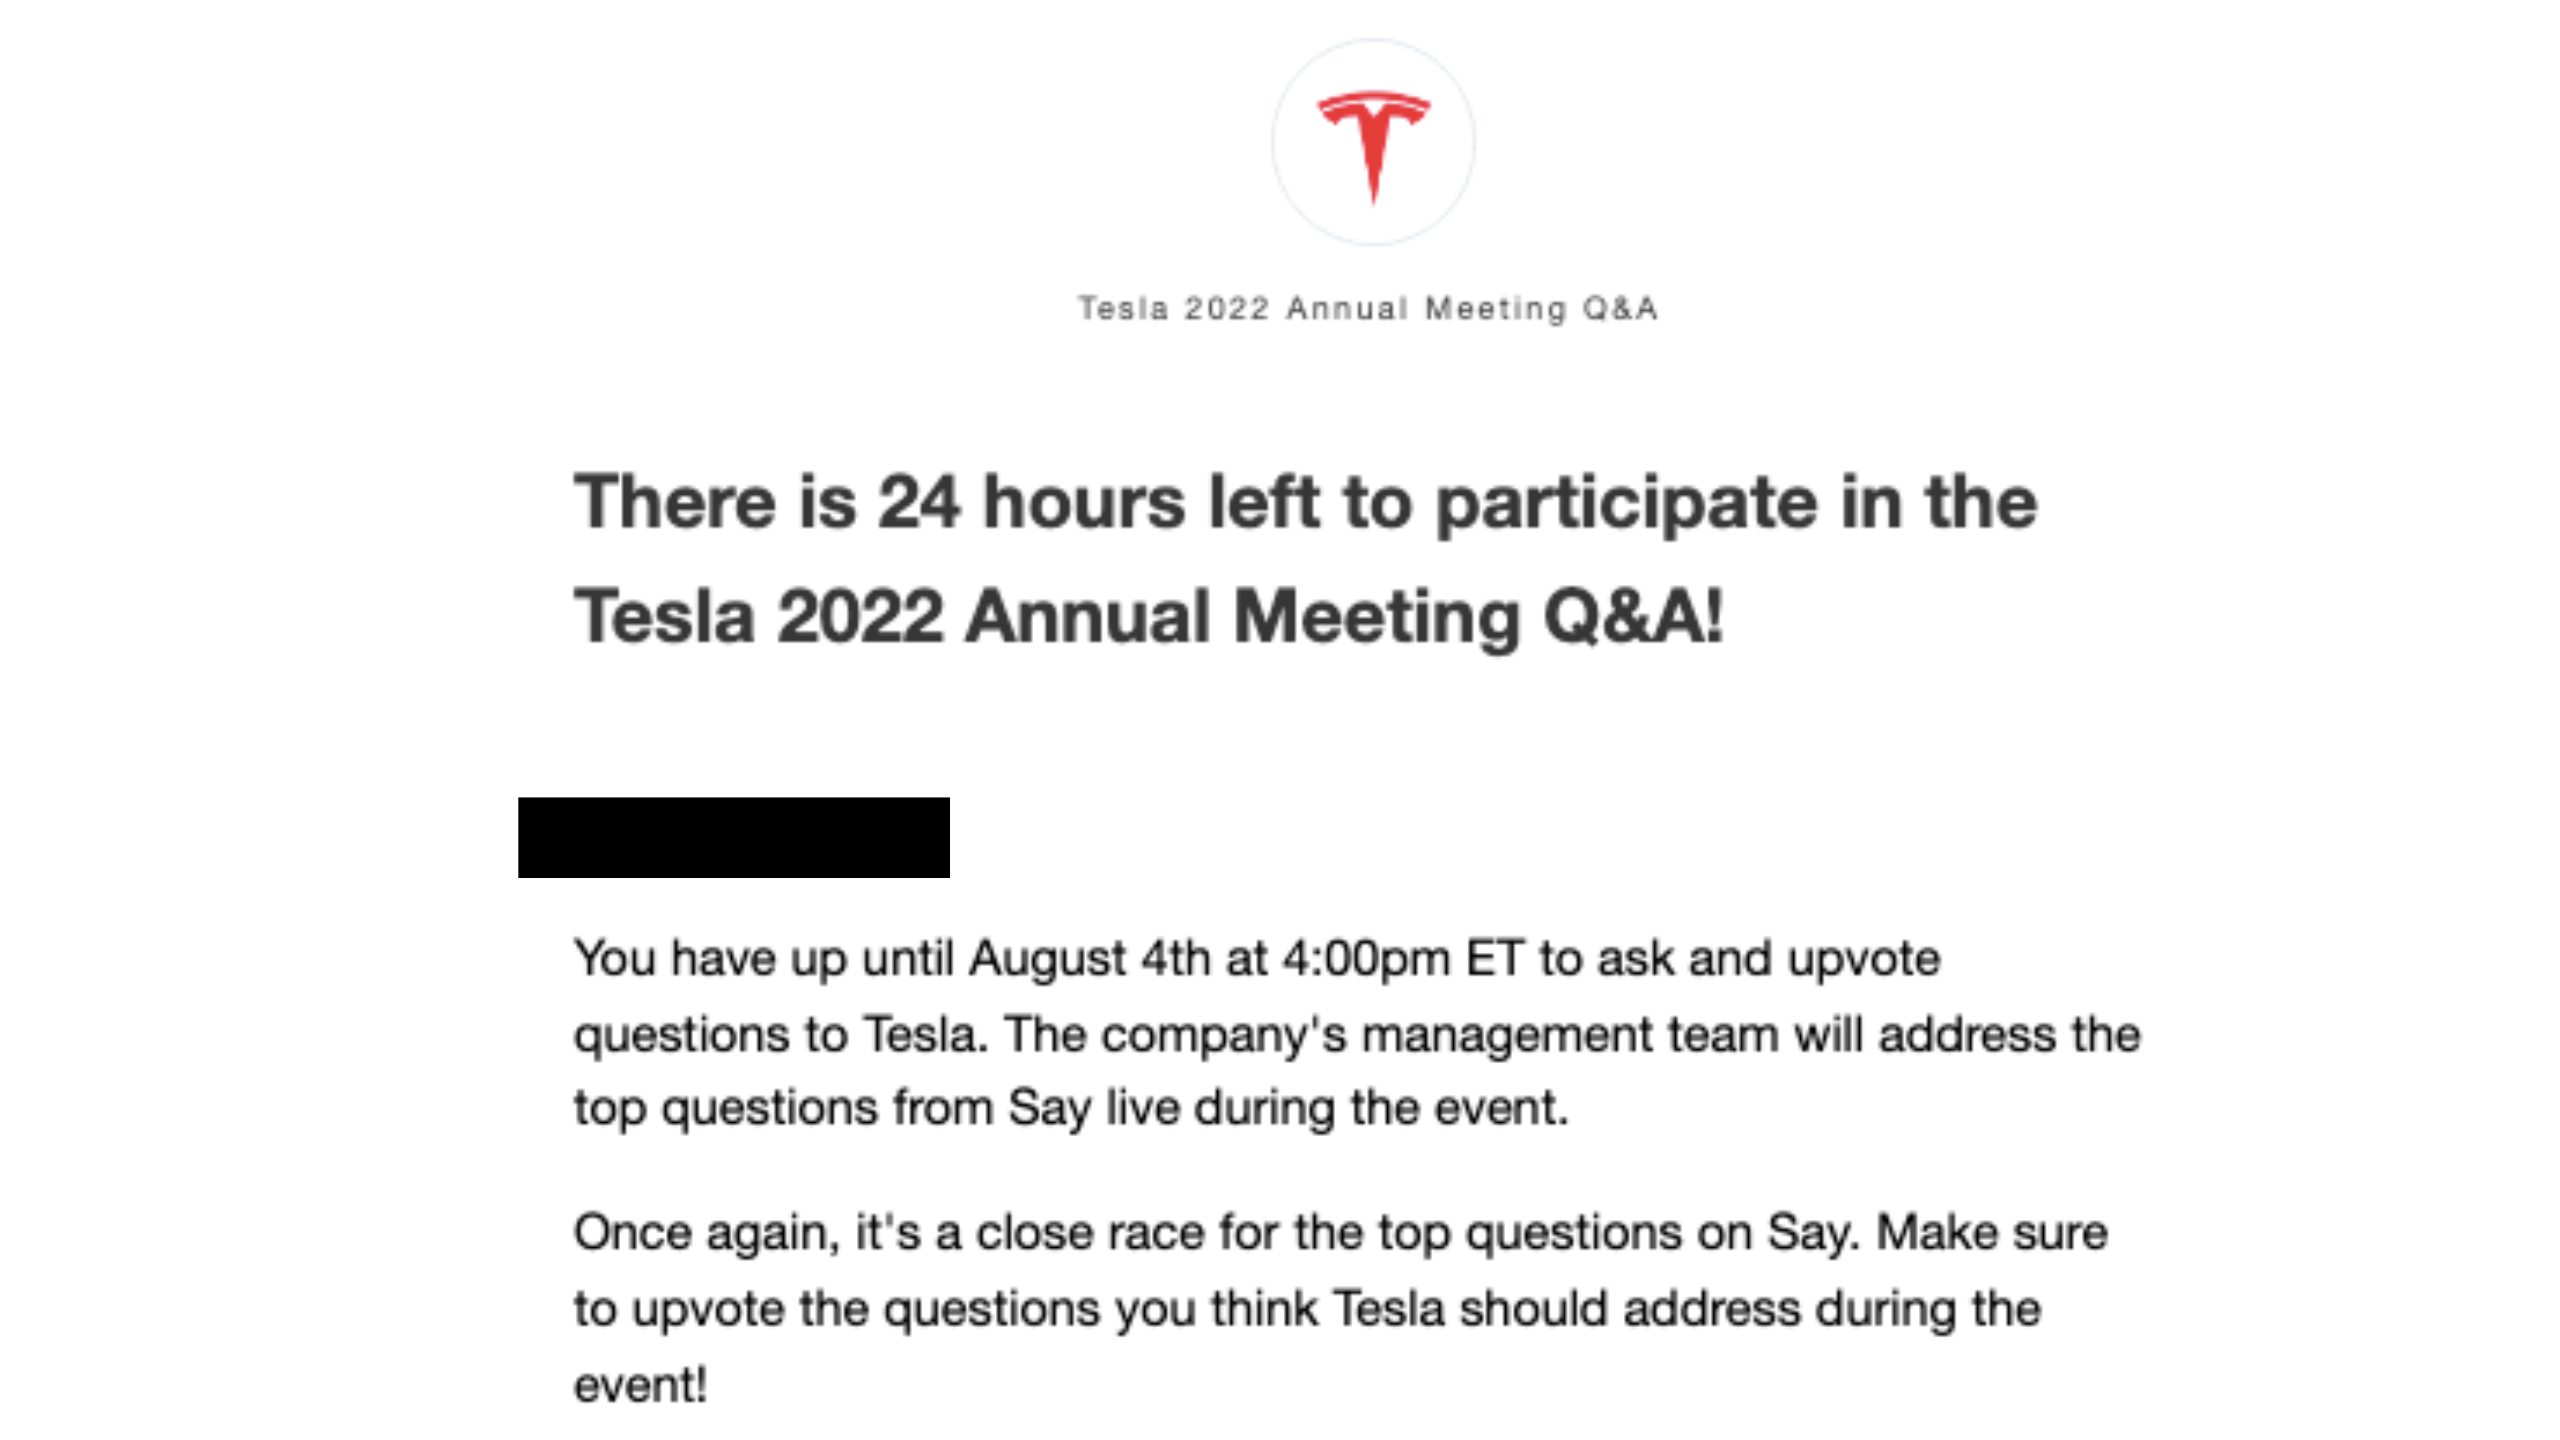 Tesla shareholders have less than 24 hours left to participate in the Q&A